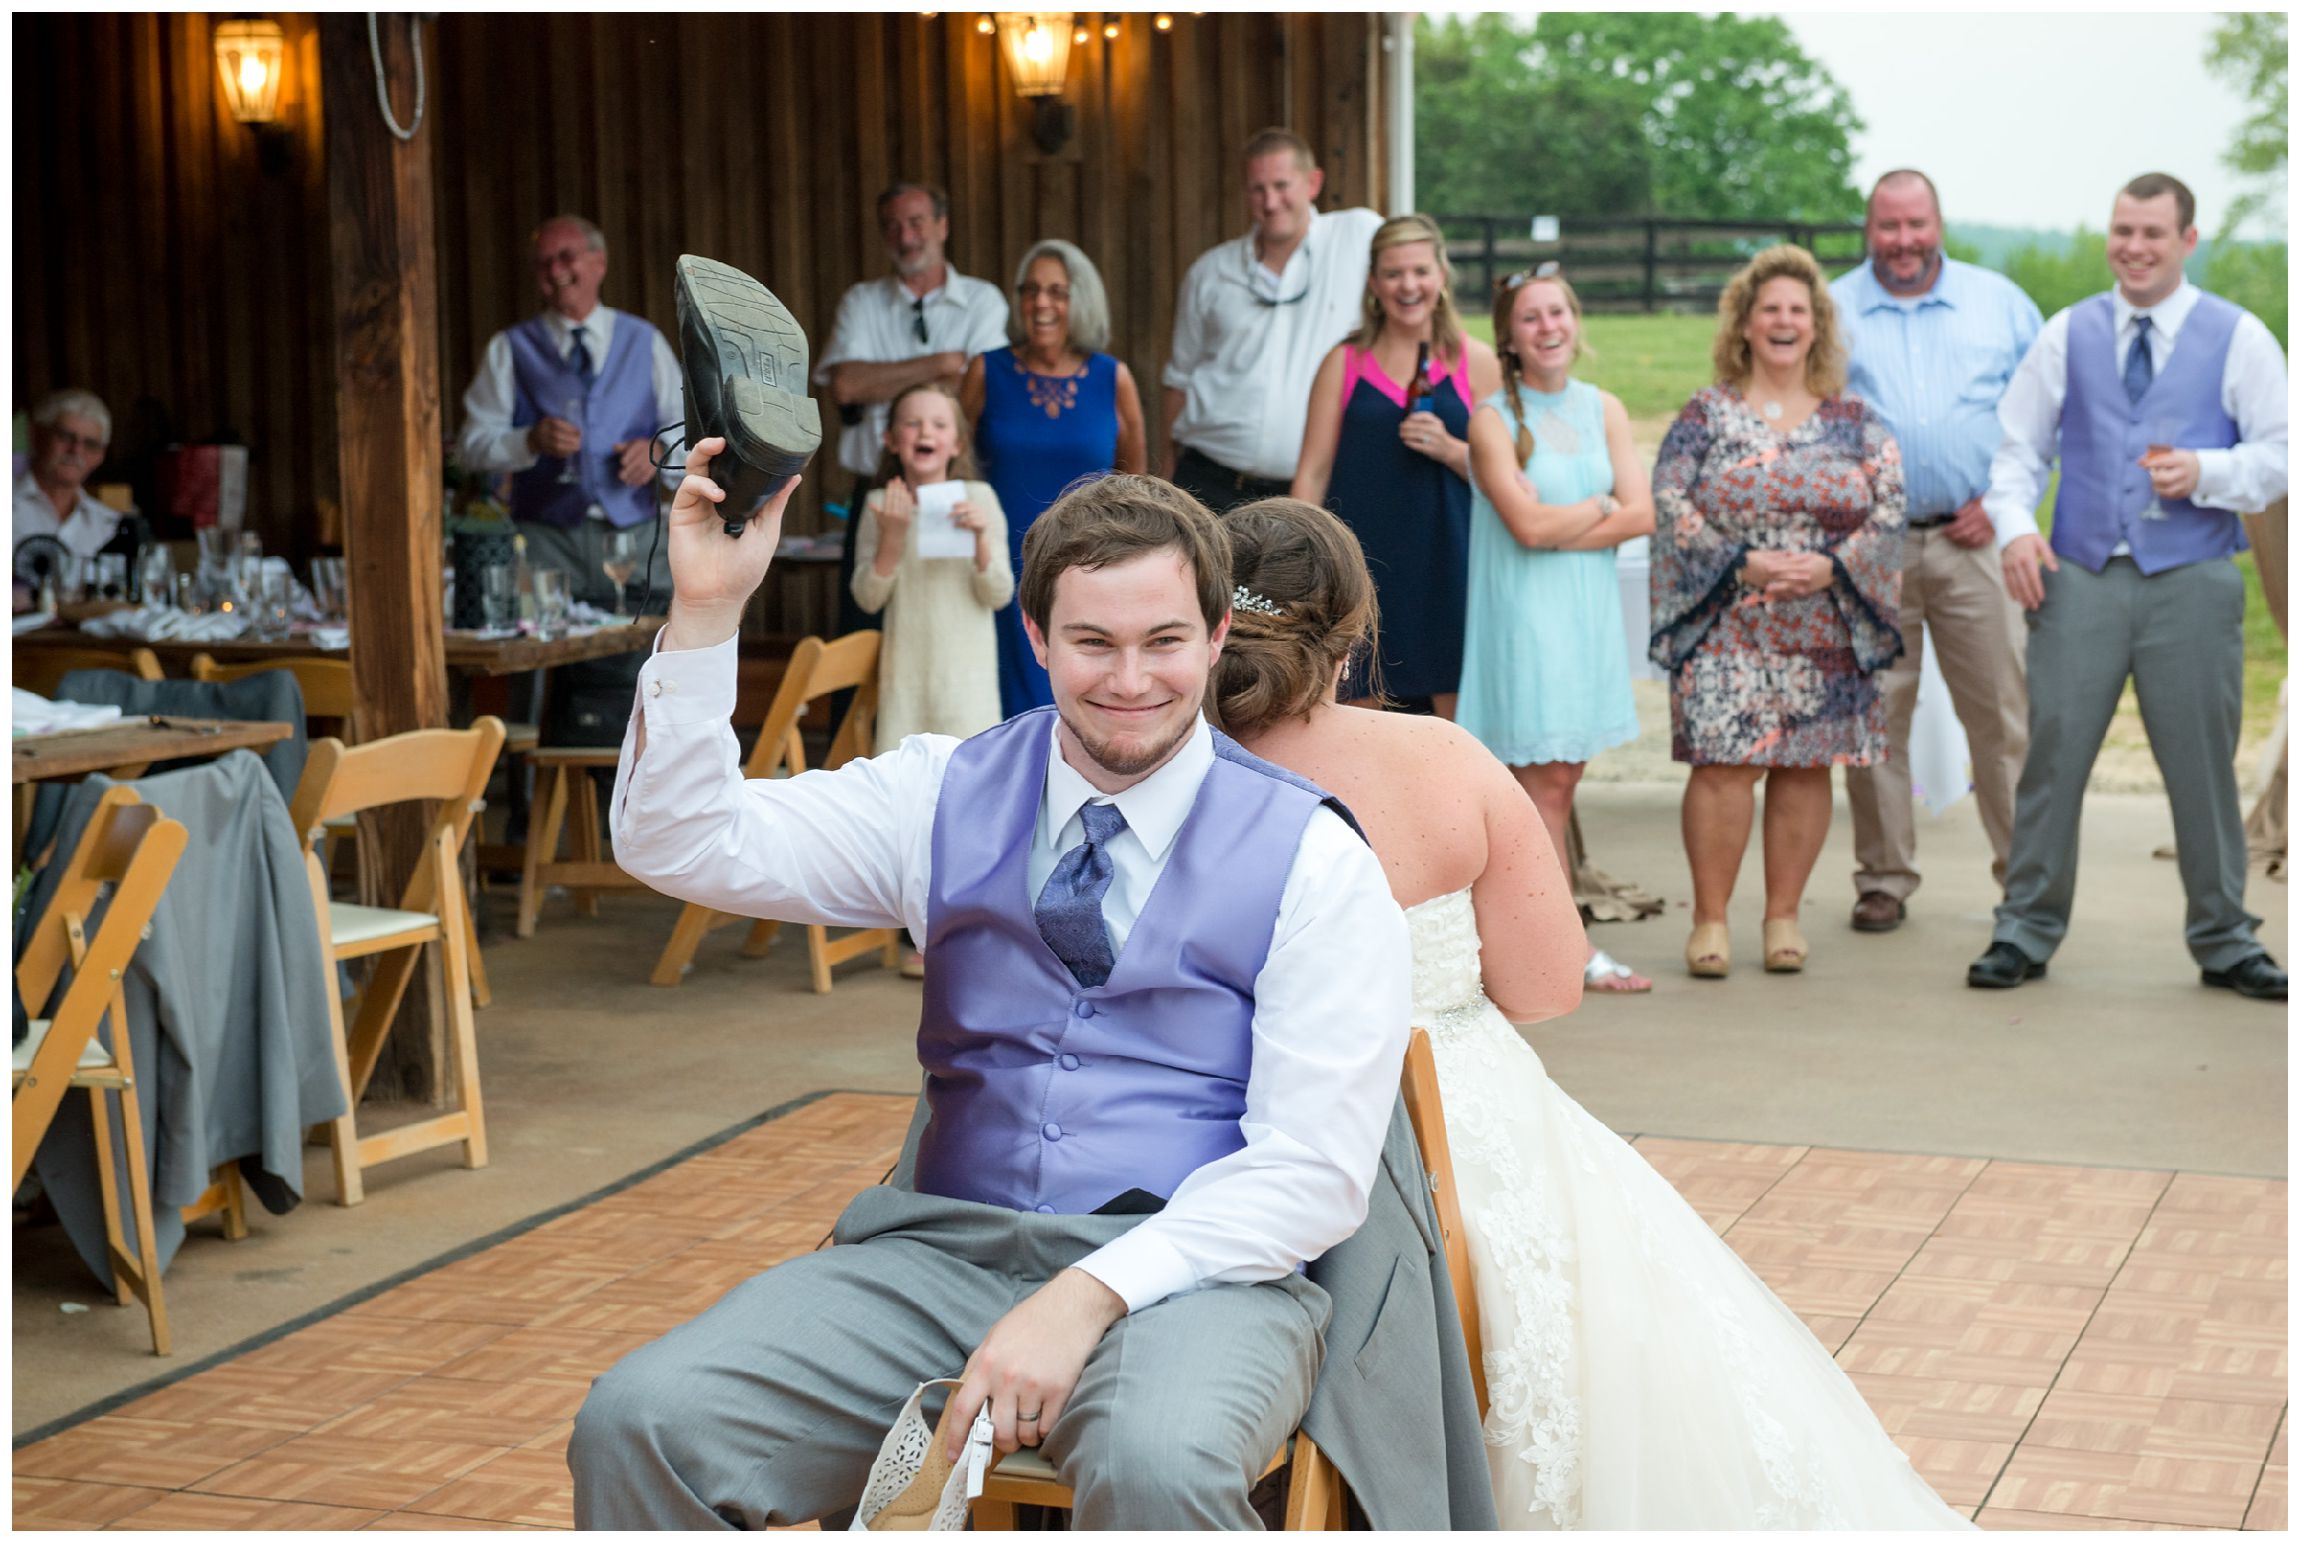 bride and groom play shoe game at barn wedding reception at Wolftrap Farm in Virginia